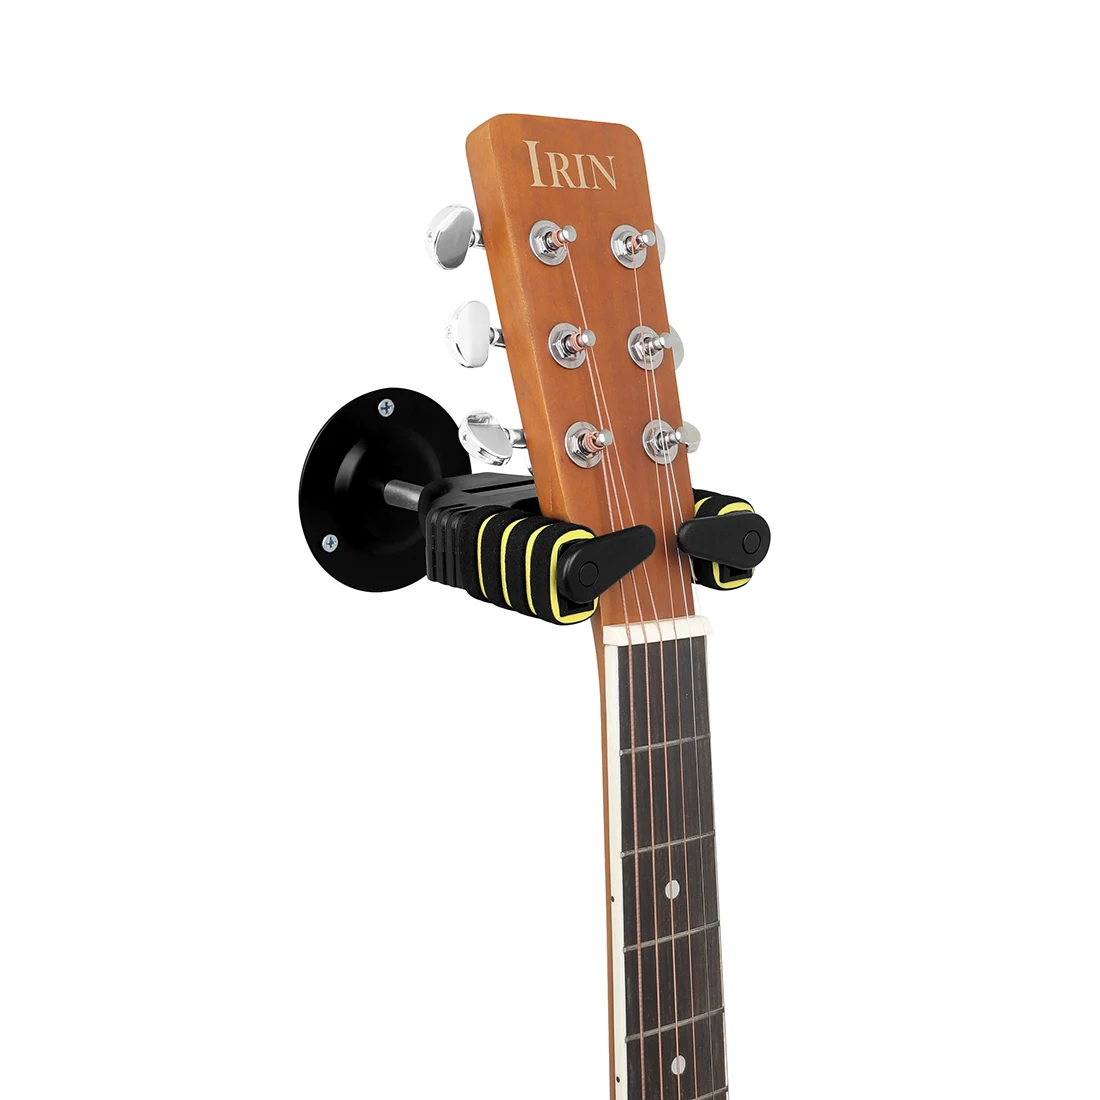 Guitar Stand Wall Mount Round Base Gravity Self-Locking Wall Stand Bracket Guitar Violin Bass Ukulele Guitar Parts Accessories цена и фото